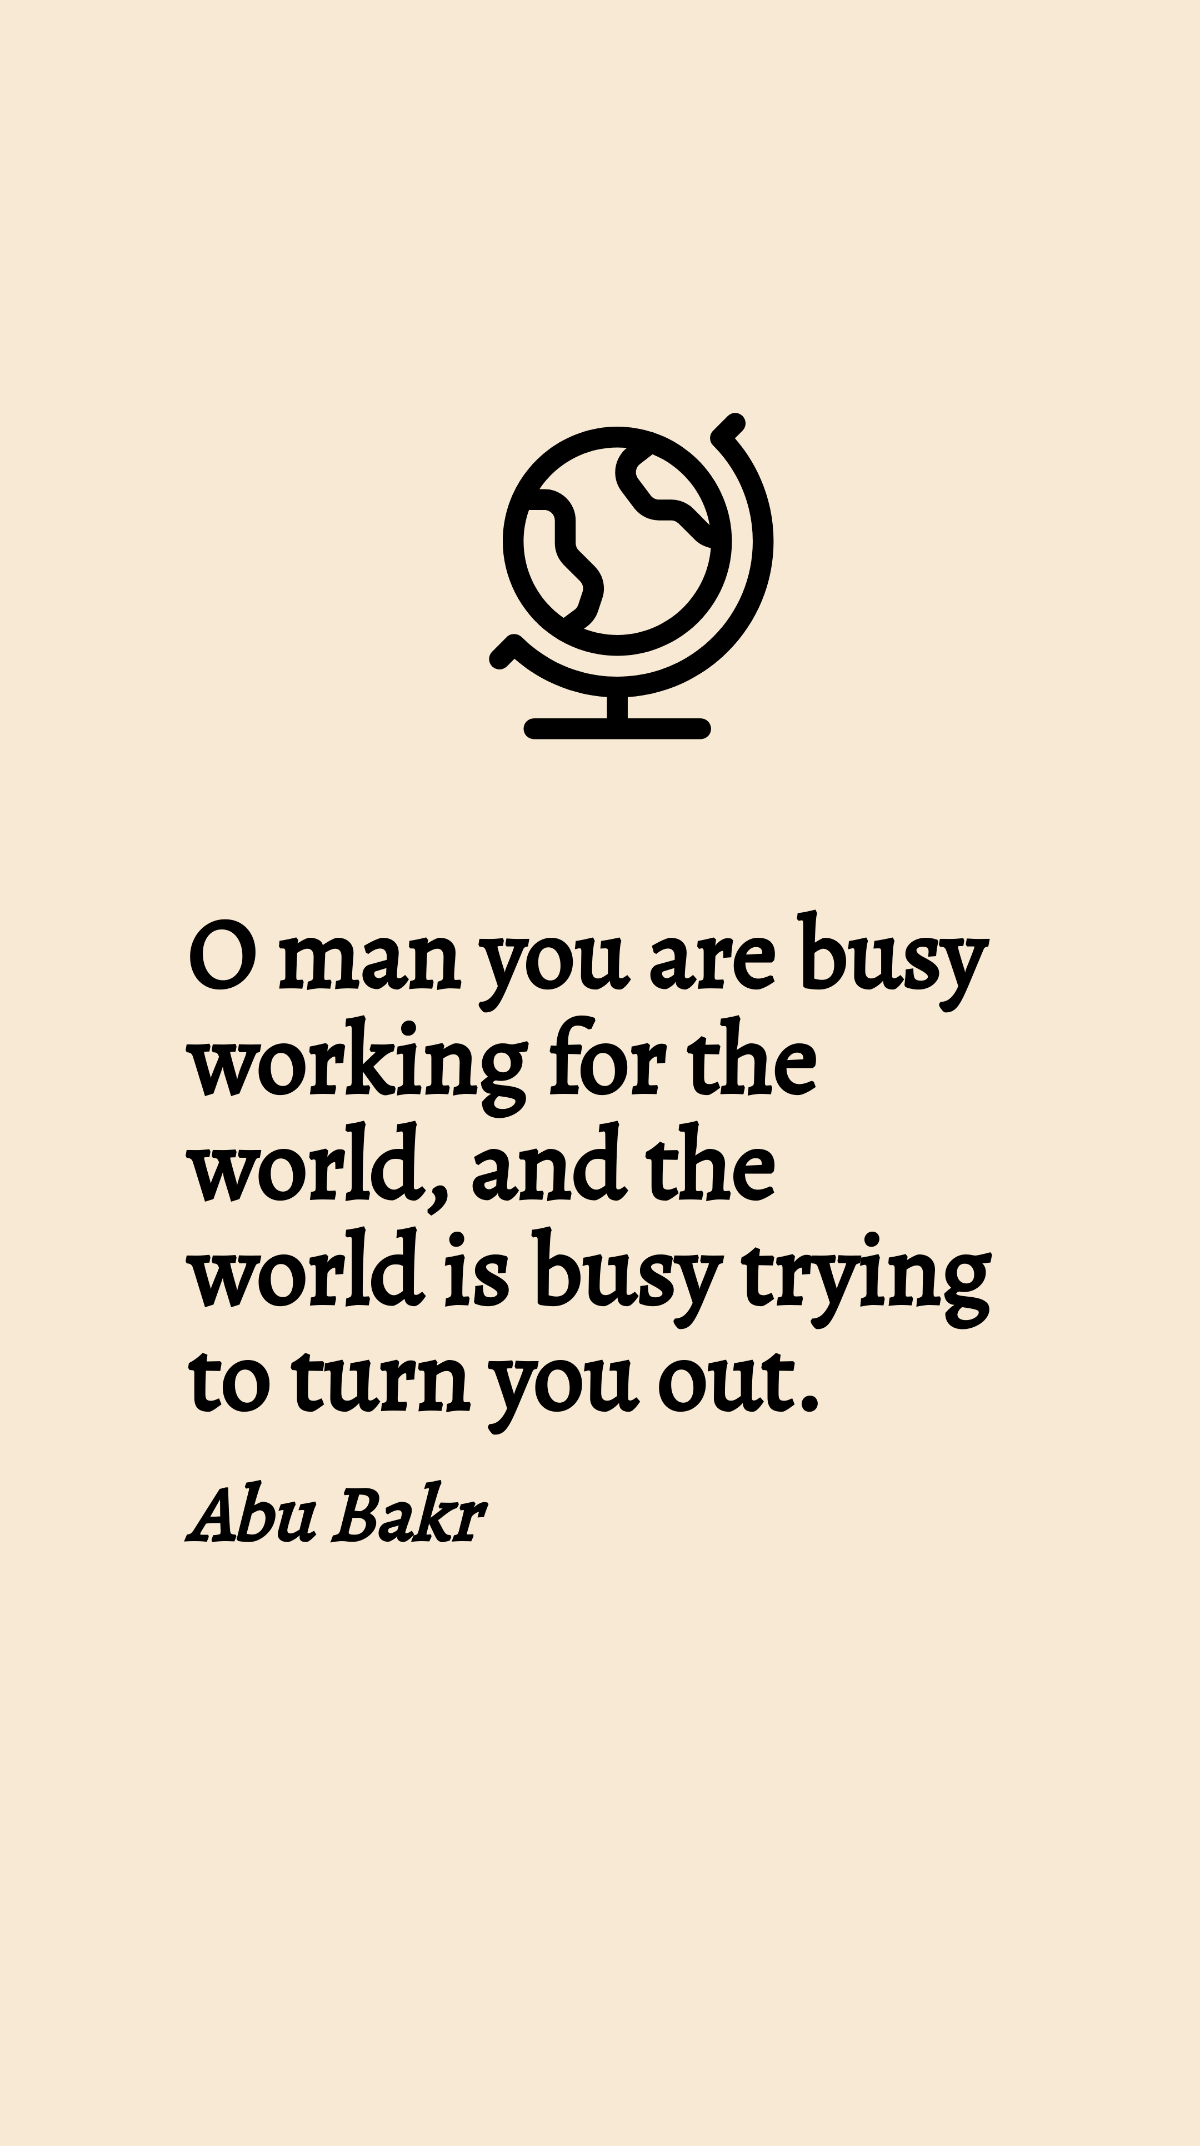 Abu Bakr - O man you are busy working for the world, and the world is busy trying to turn you out.